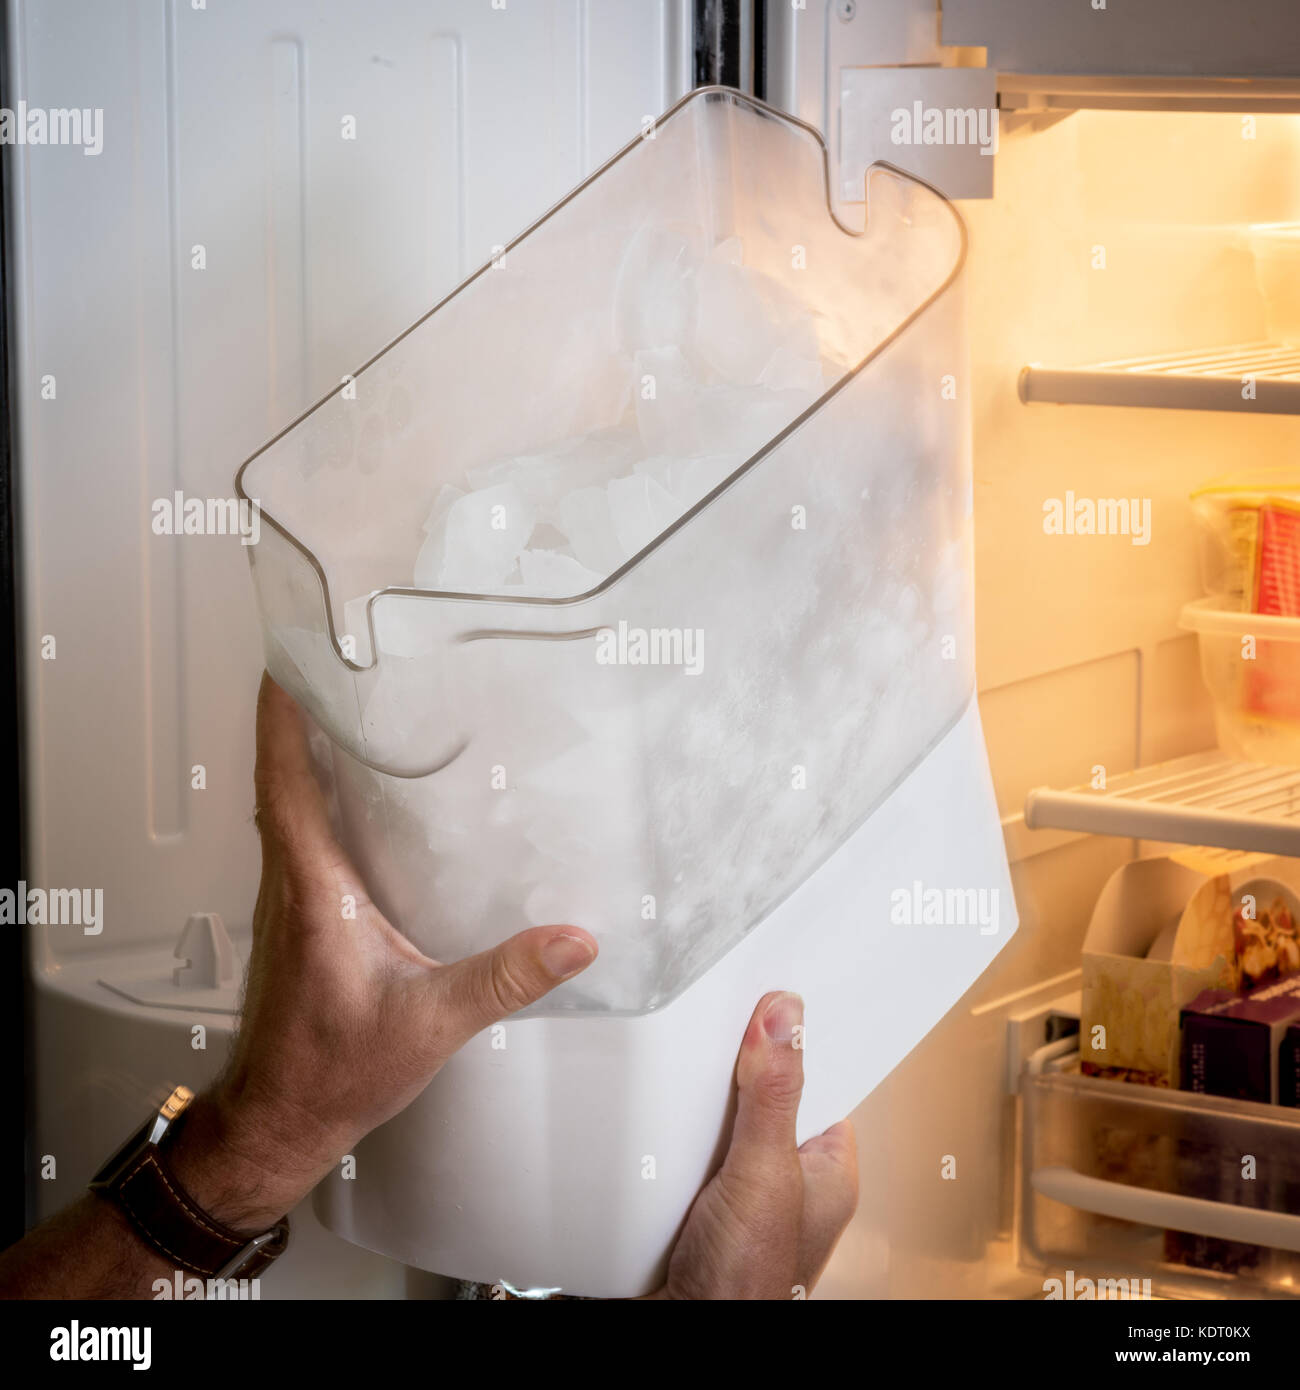 Bucket that holds ice from a freezer appliance Stock Photo